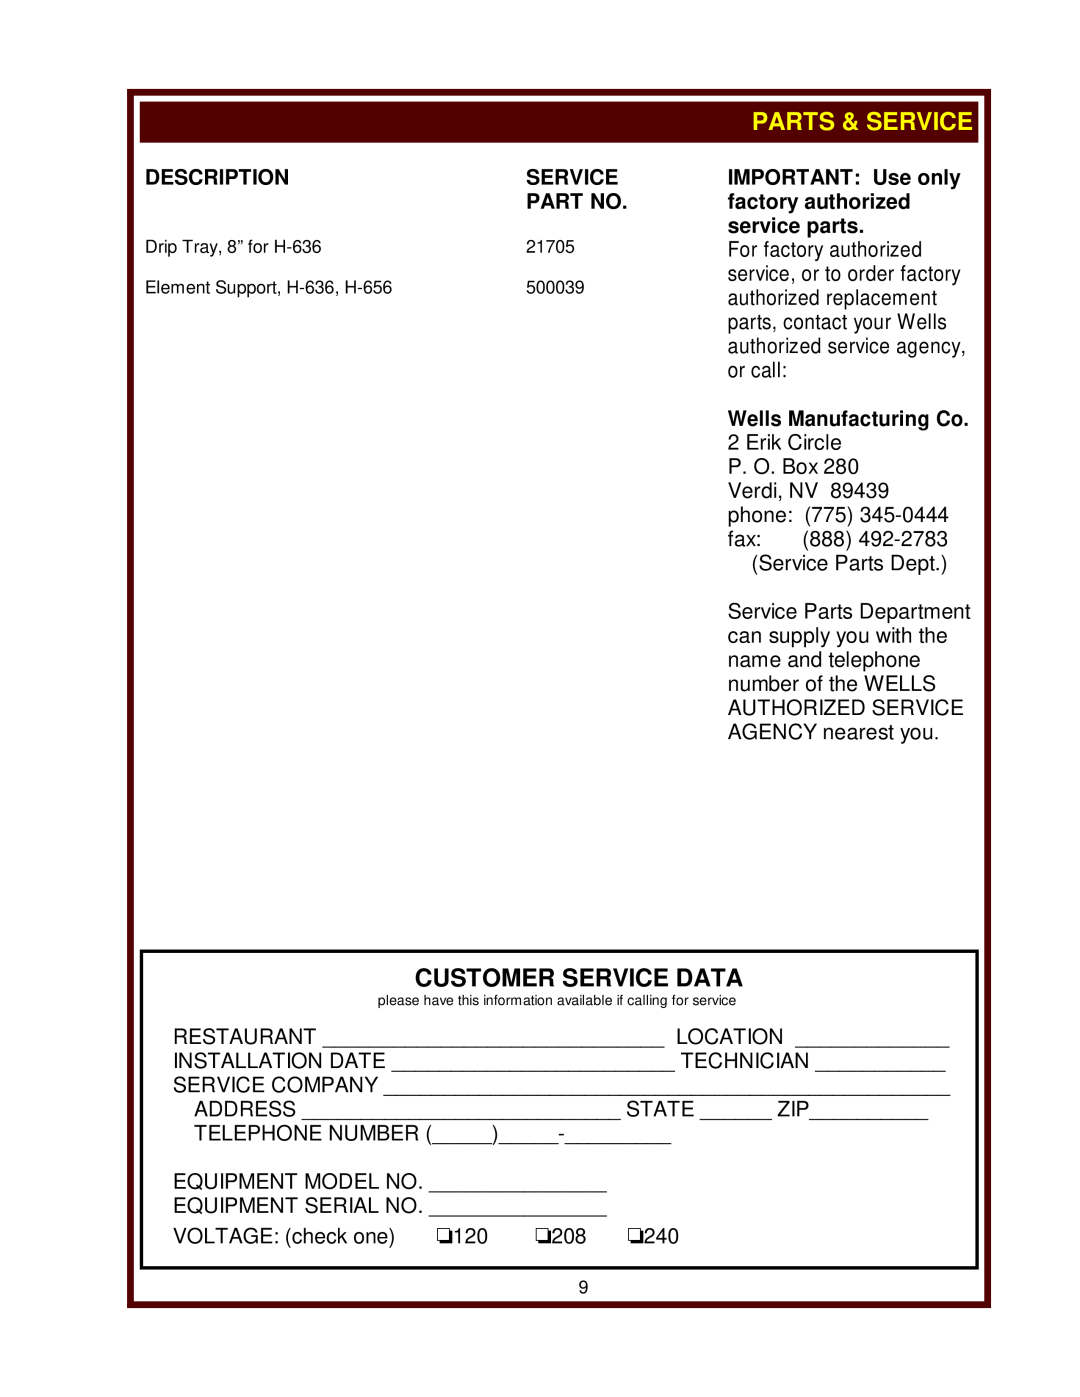 Wells H-636, H-706, H-336 operation manual Parts & Service, Customer Service Data, Description, Wells Manufacturing Co 